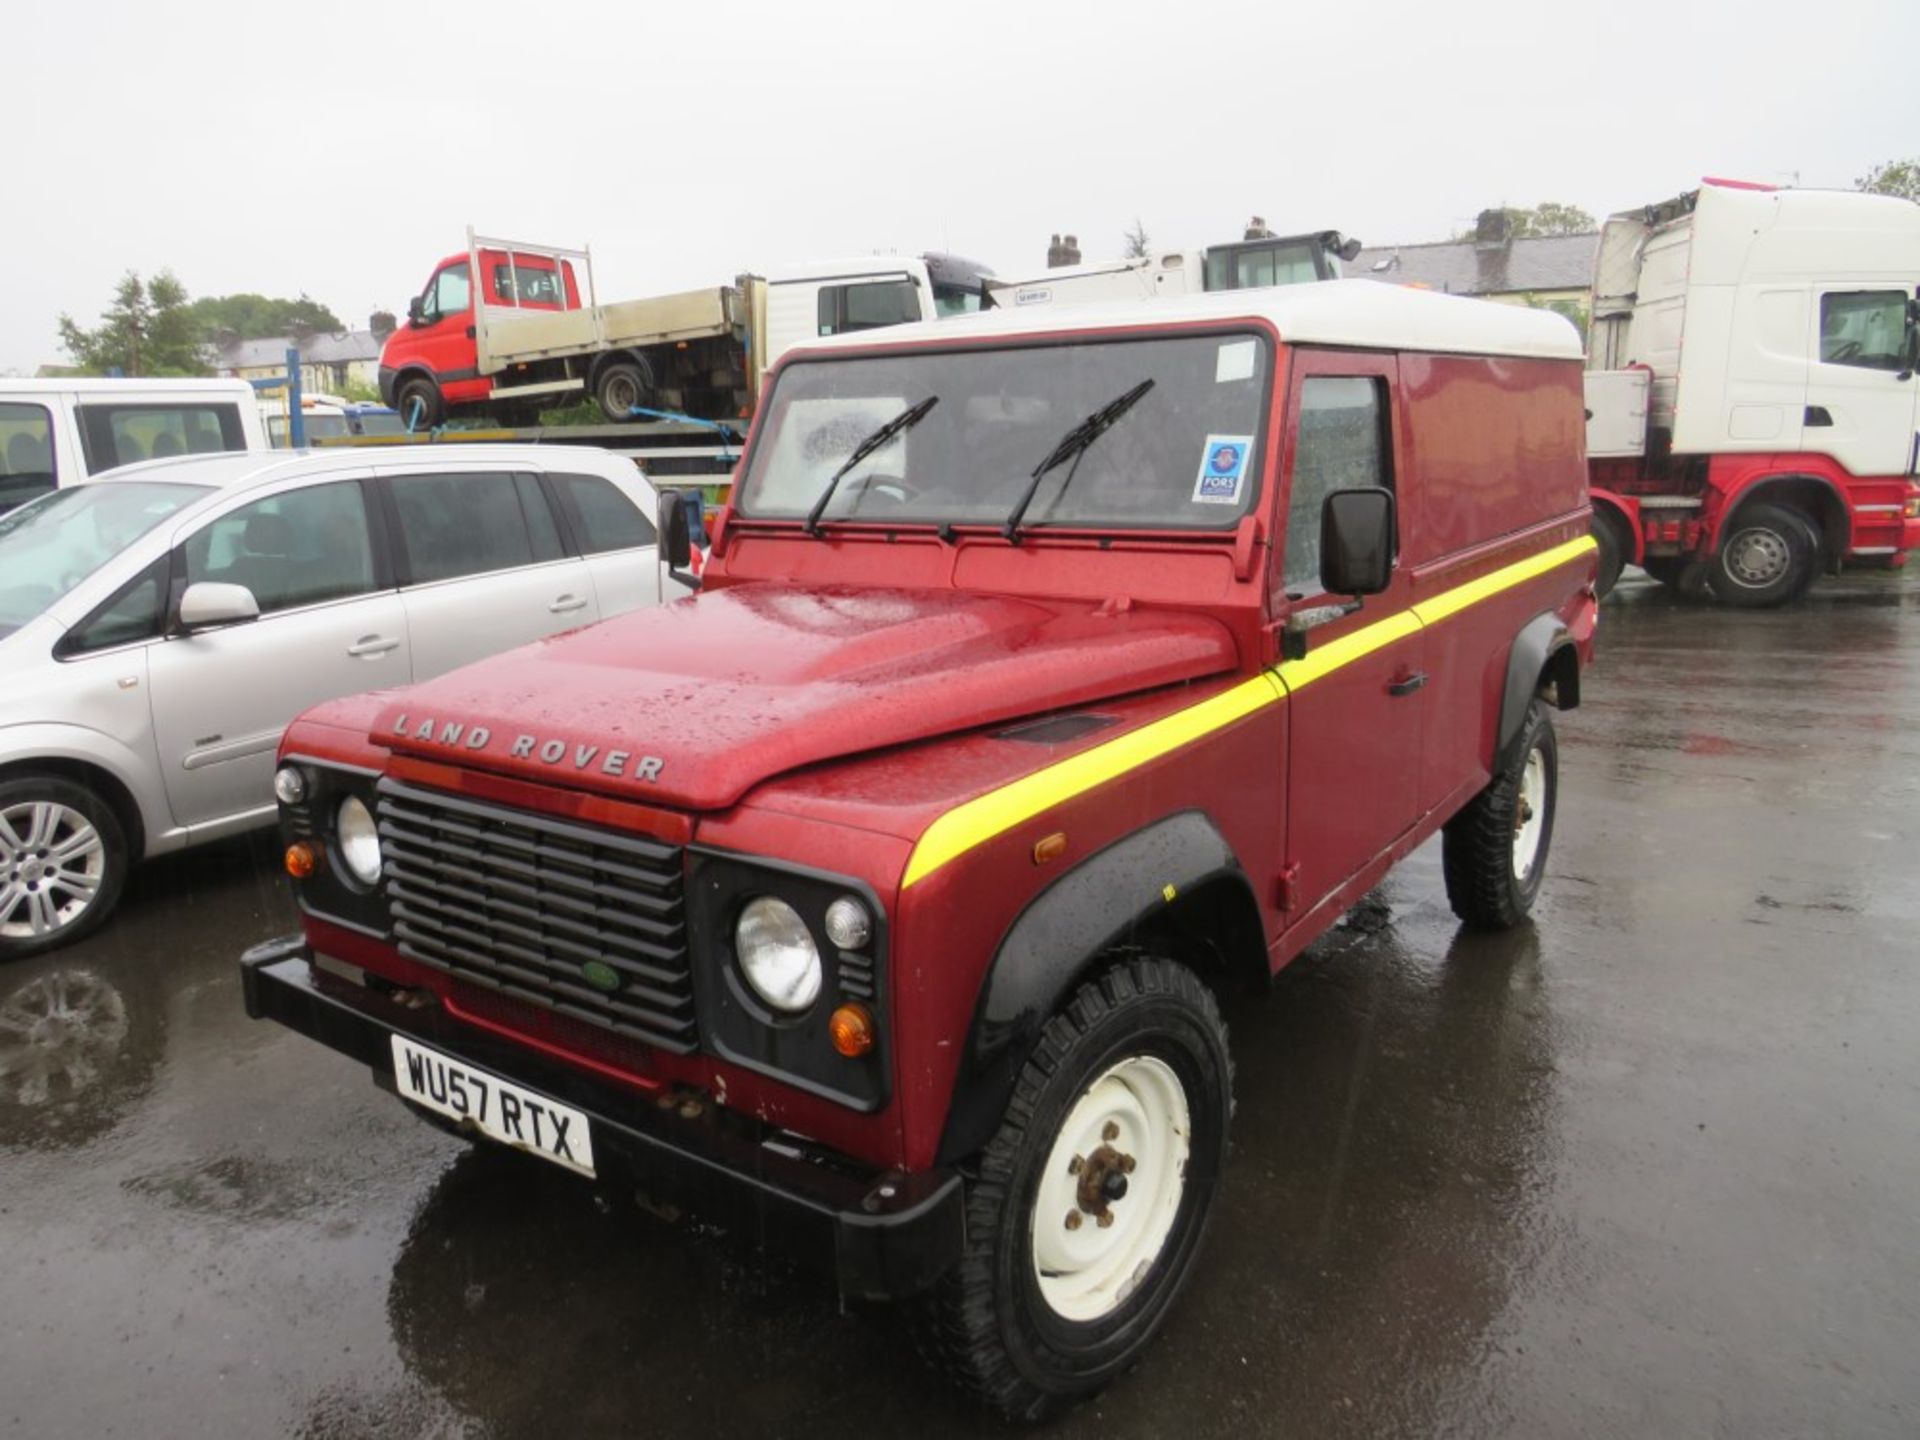 57 reg LAND ROVER DEFENDER 110 HARD TOP 4 X 4, 1ST REG 12/07, 210911M, V5 HERE, 1 OWNER FROM NEW [NO - Image 2 of 7